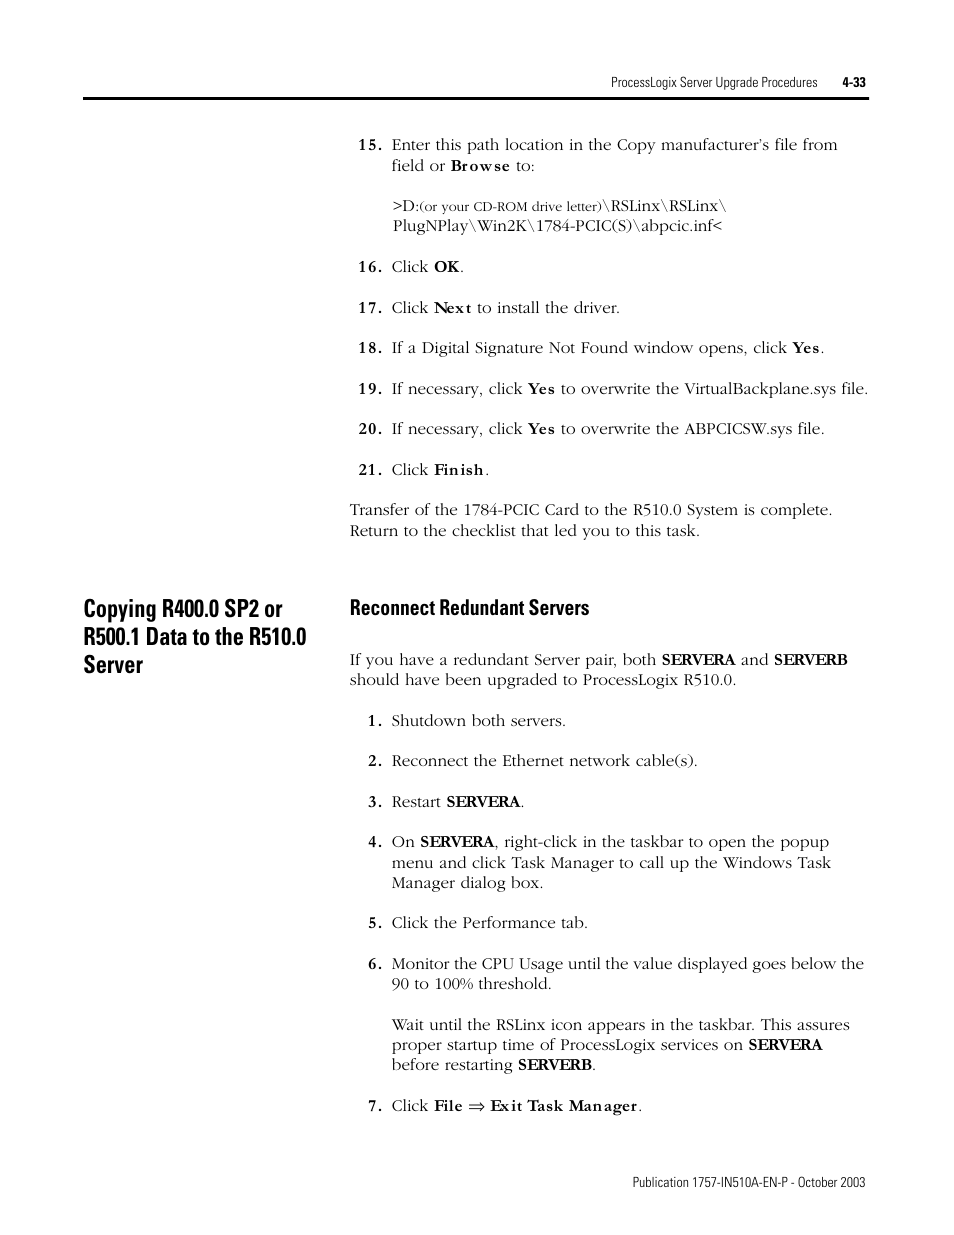 Reconnect redundant servers, Reconnect redundant servers -33 | Rockwell Automation 1757-SWKIT5100 ProcessLogix R510.0 Installation and Upgrade Guide User Manual | Page 117 / 271